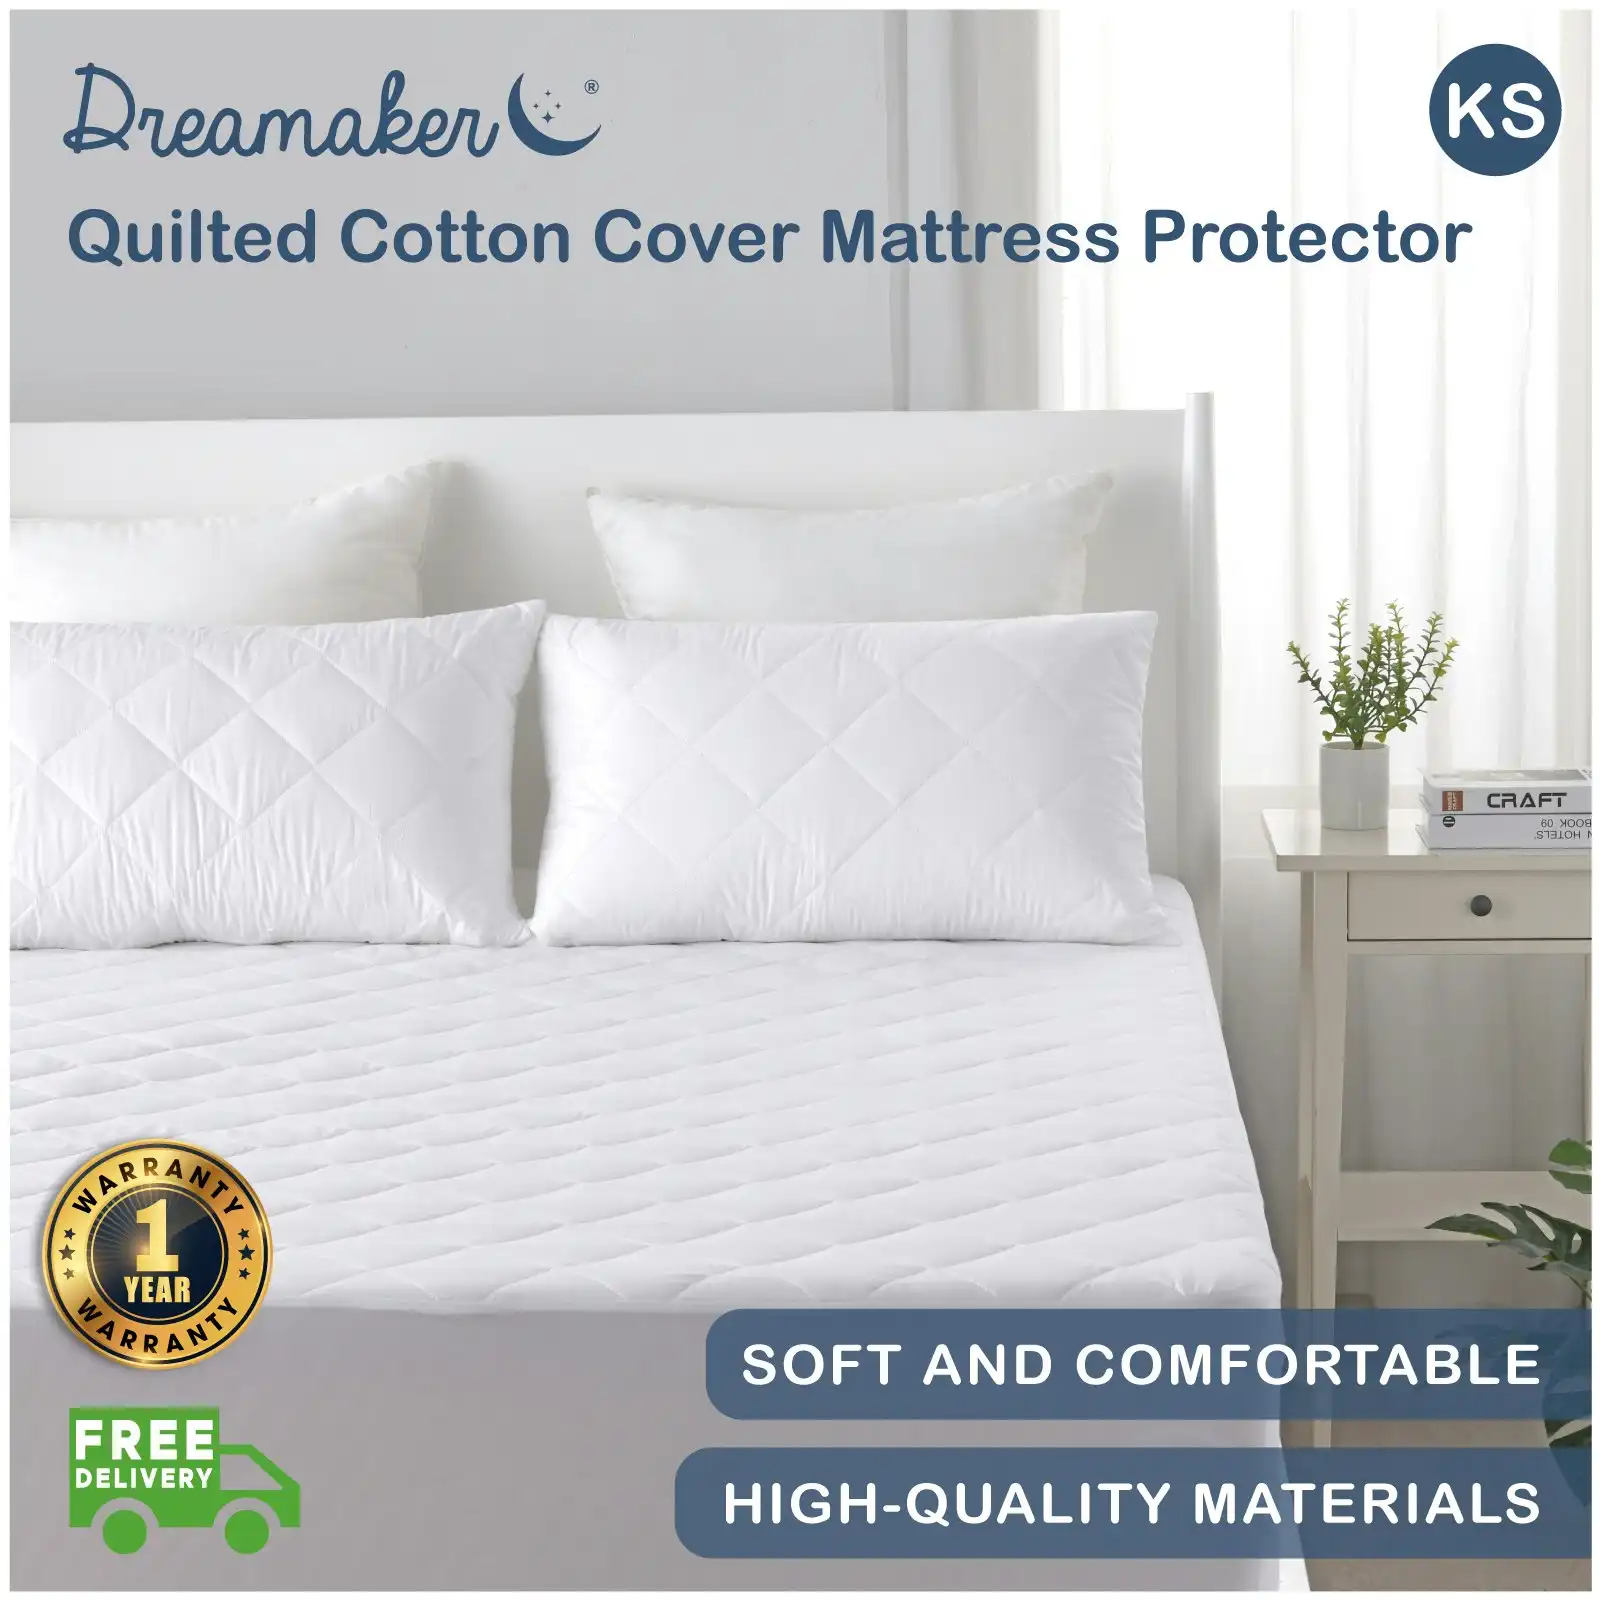 9009031 Dreamaker Quilted Cotton Cover Mattress Protector - King Single Bed